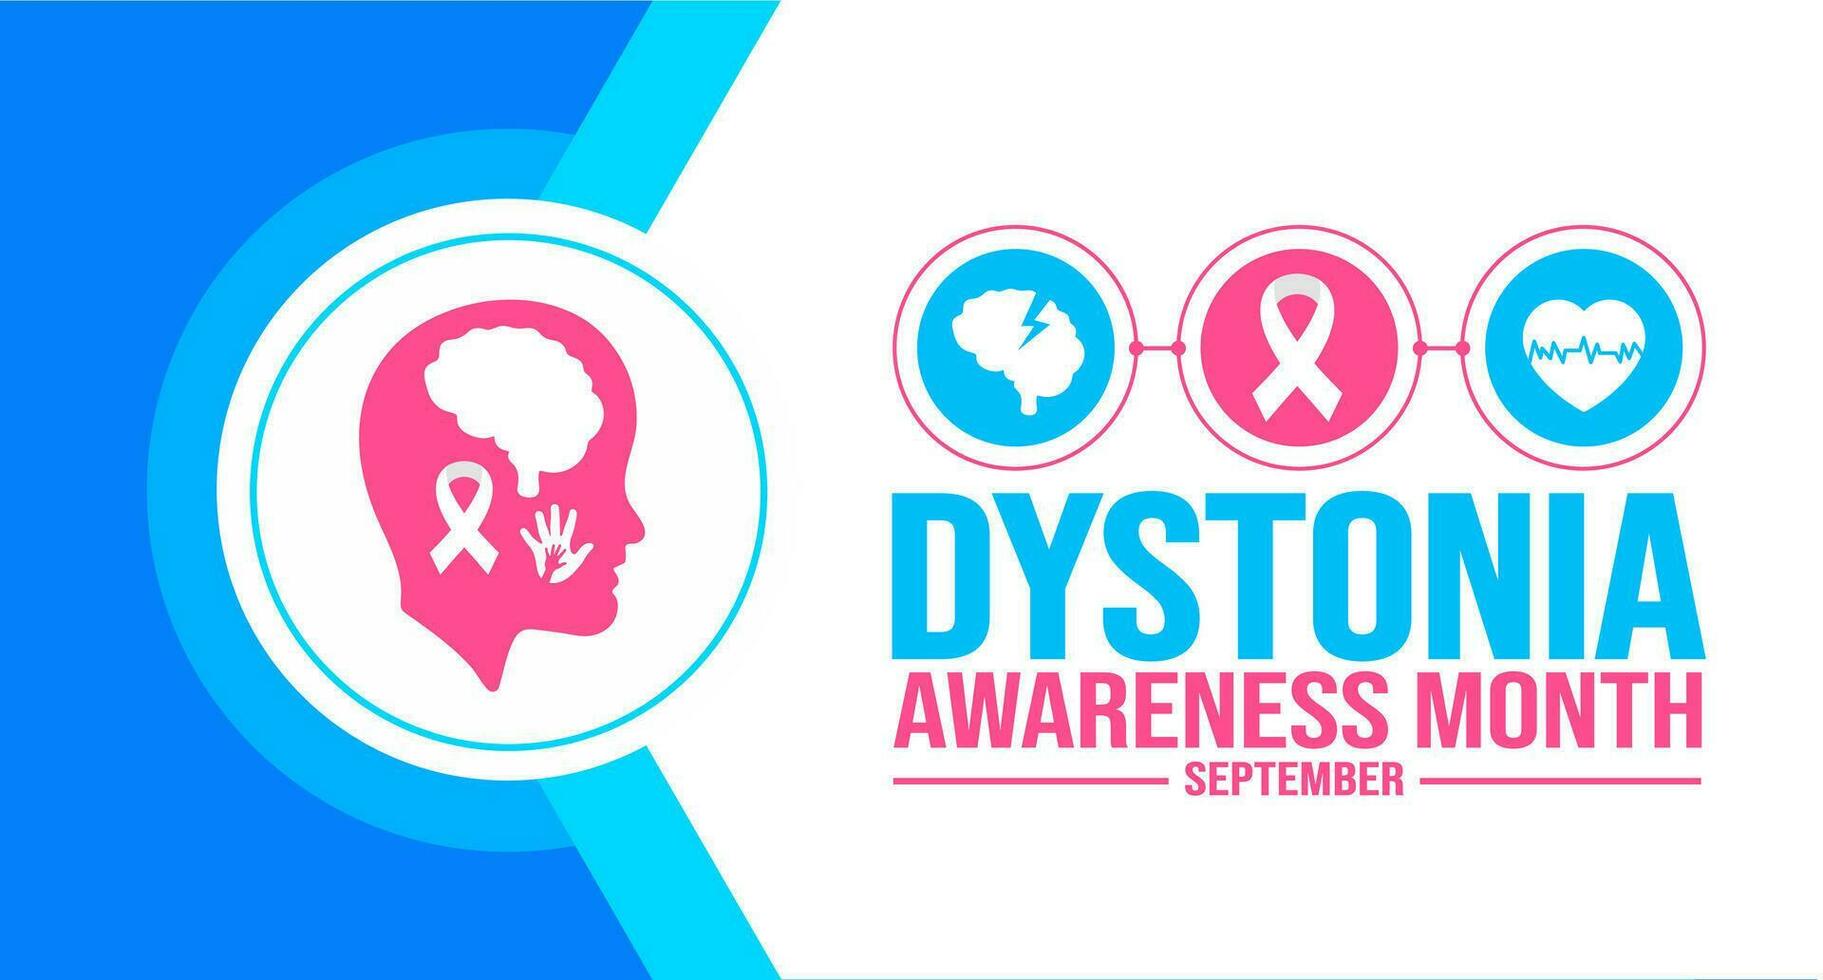 September is Dystonia Awareness Month background template. Holiday concept. background, banner, placard, card, and poster design template with text inscription and standard color. vector illustration.